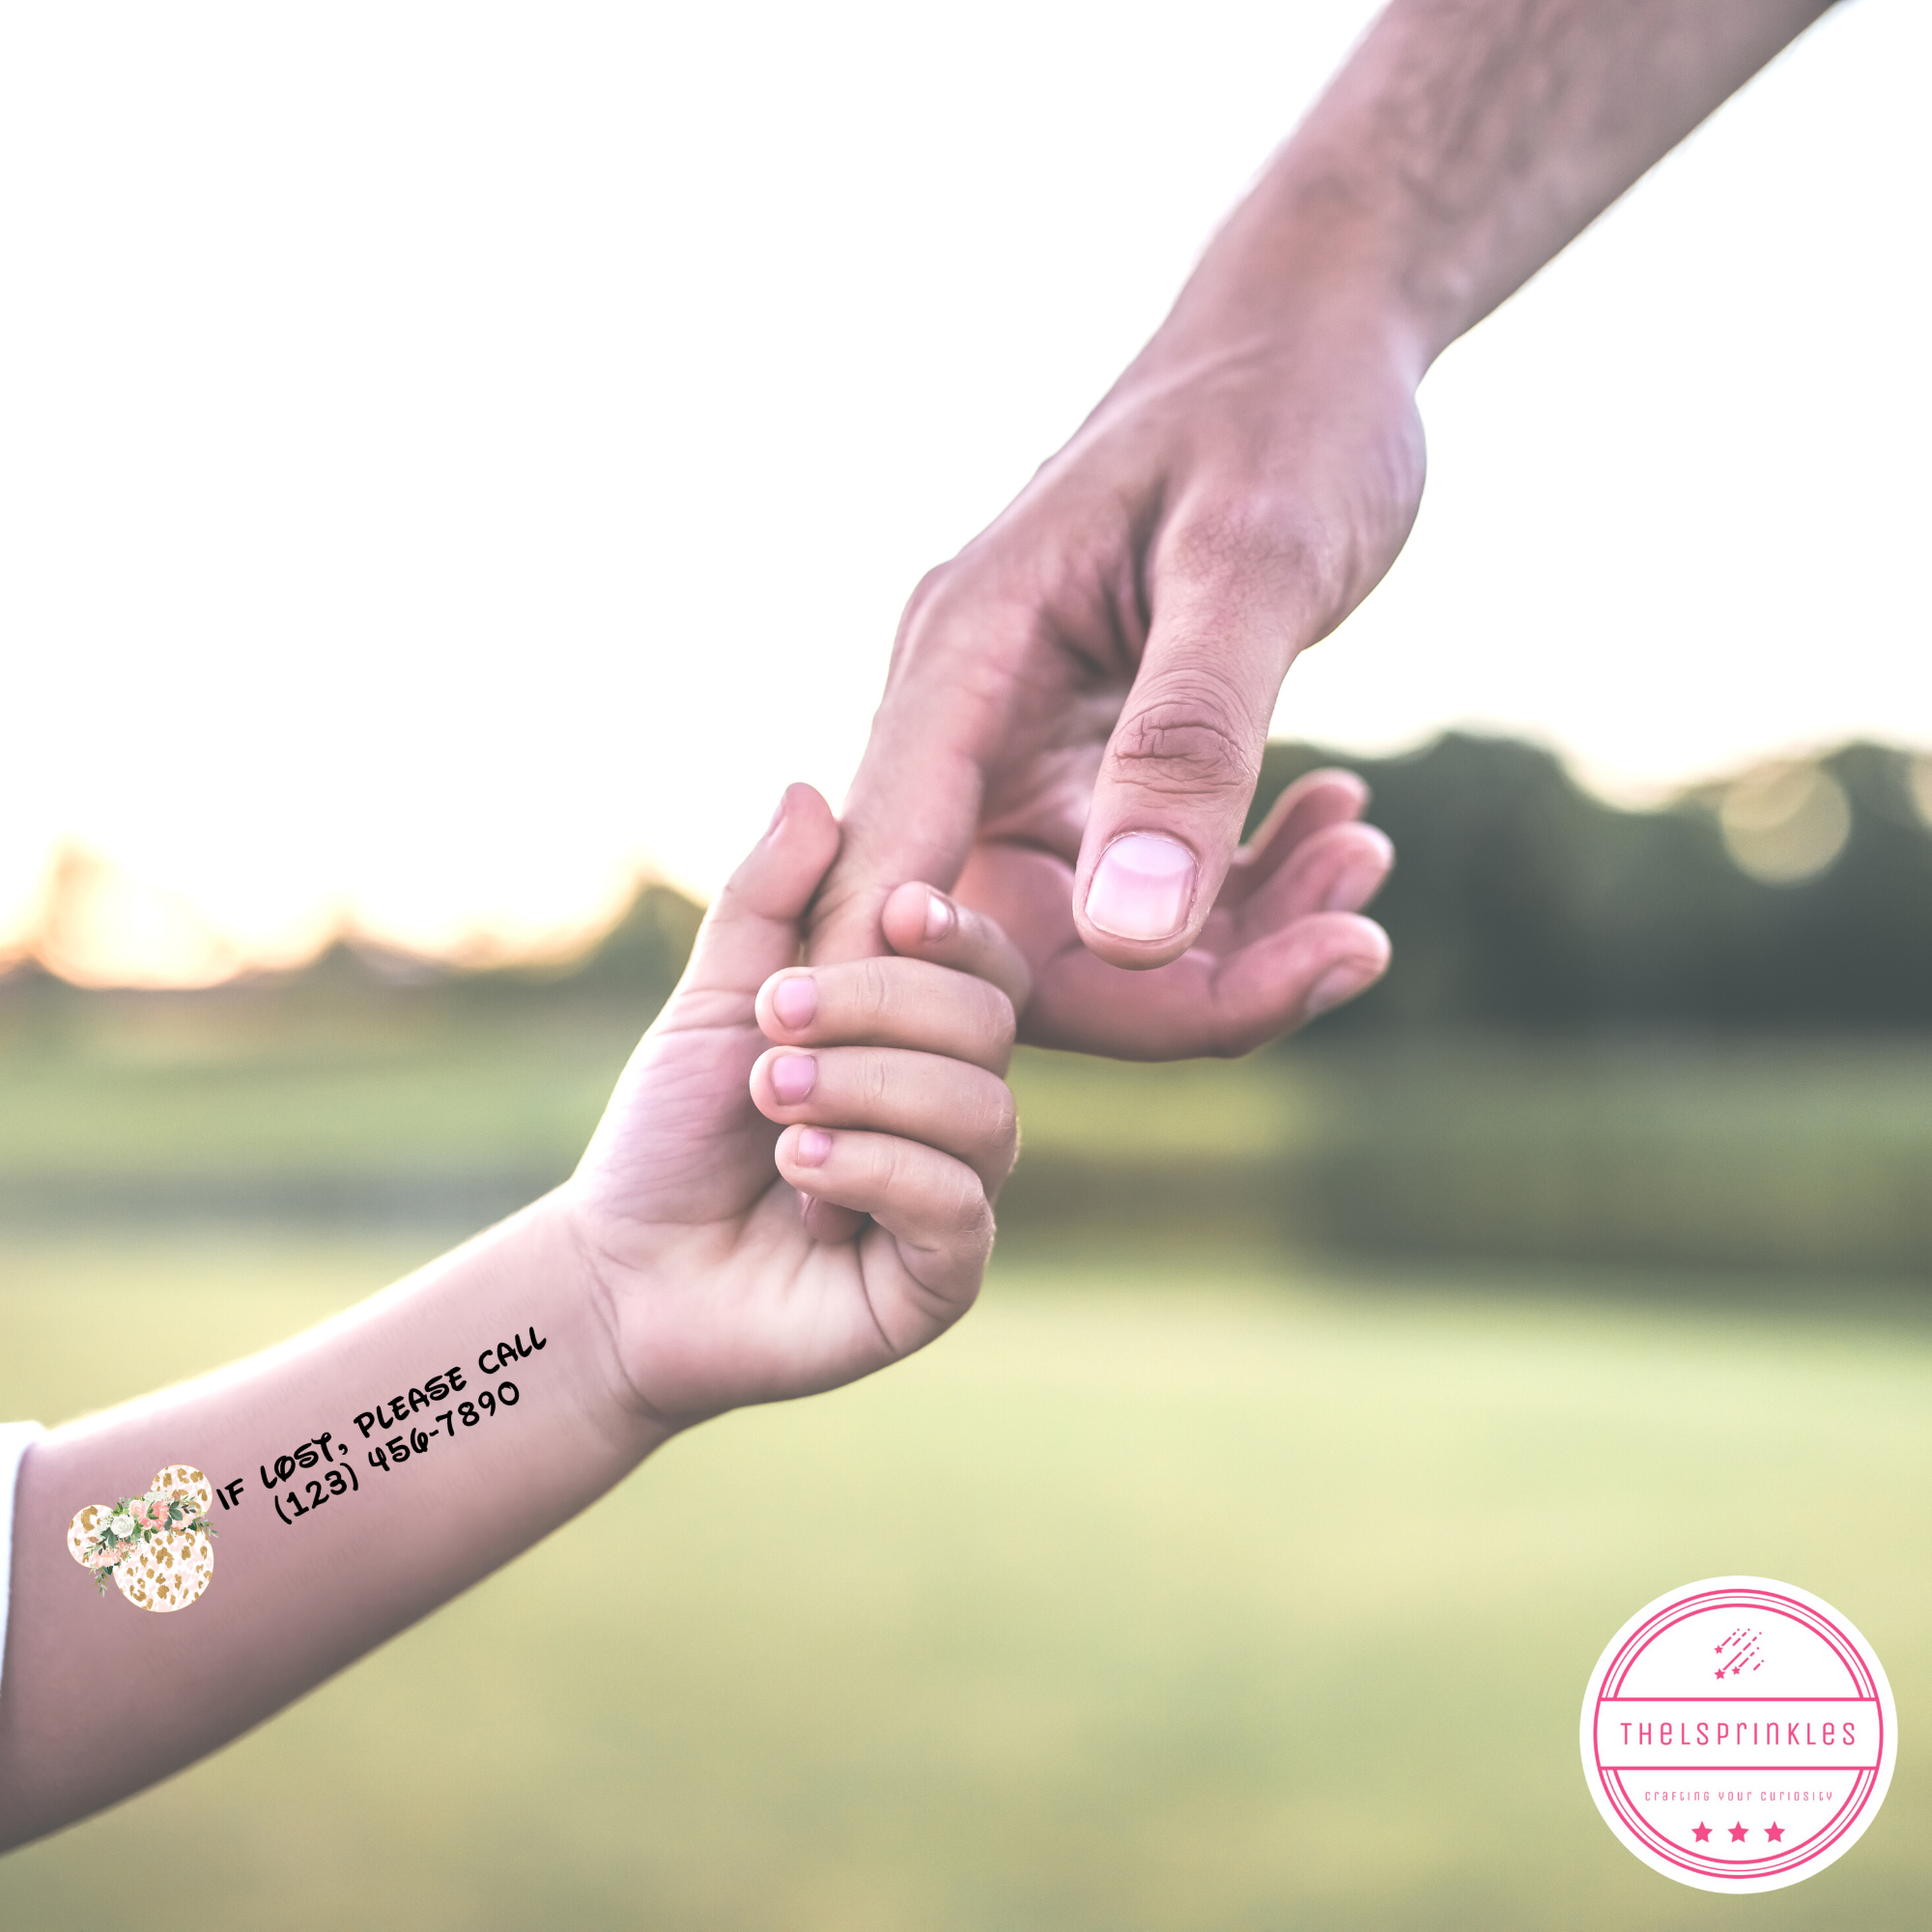 8 Worst Temporary Tattoos for Your First Date